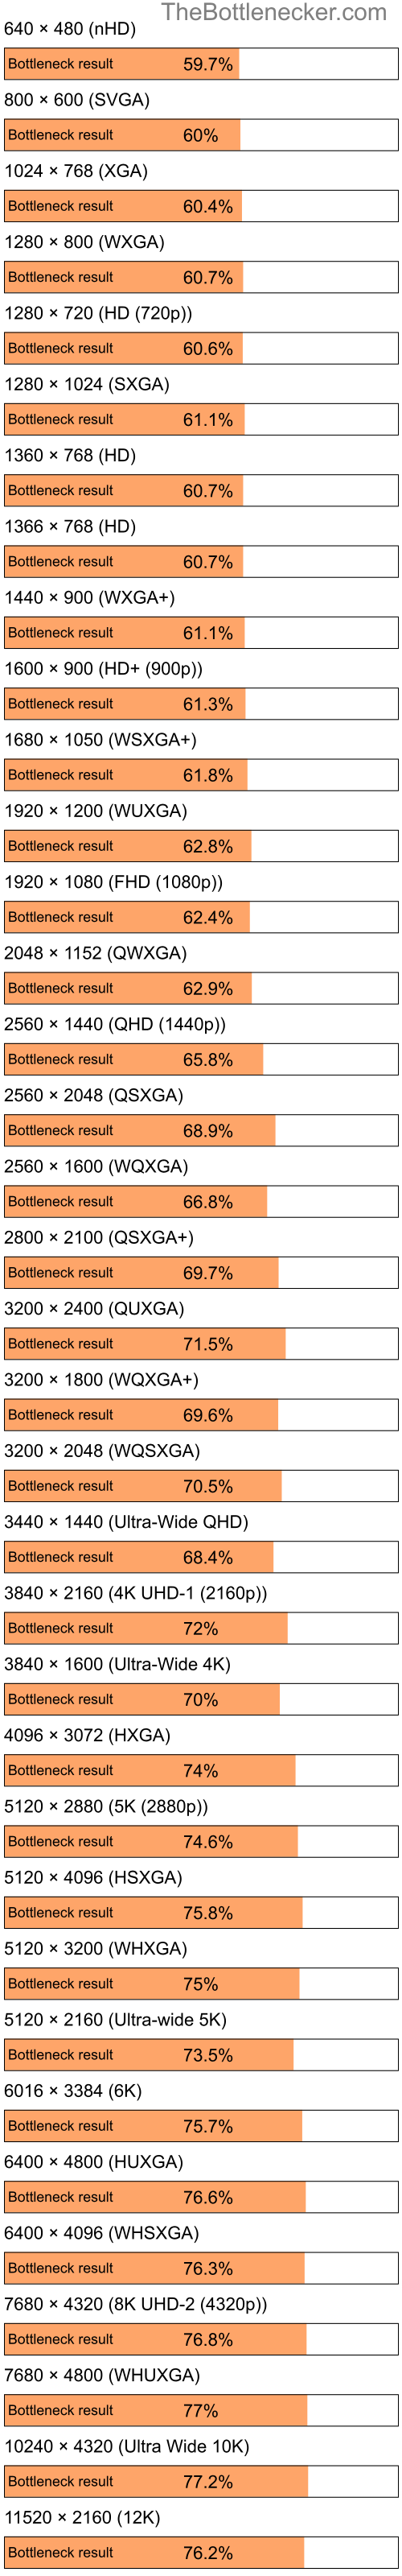 Bottleneck results by resolution for Intel Atom Z520 and AMD Radeon X1950 GT in General Tasks